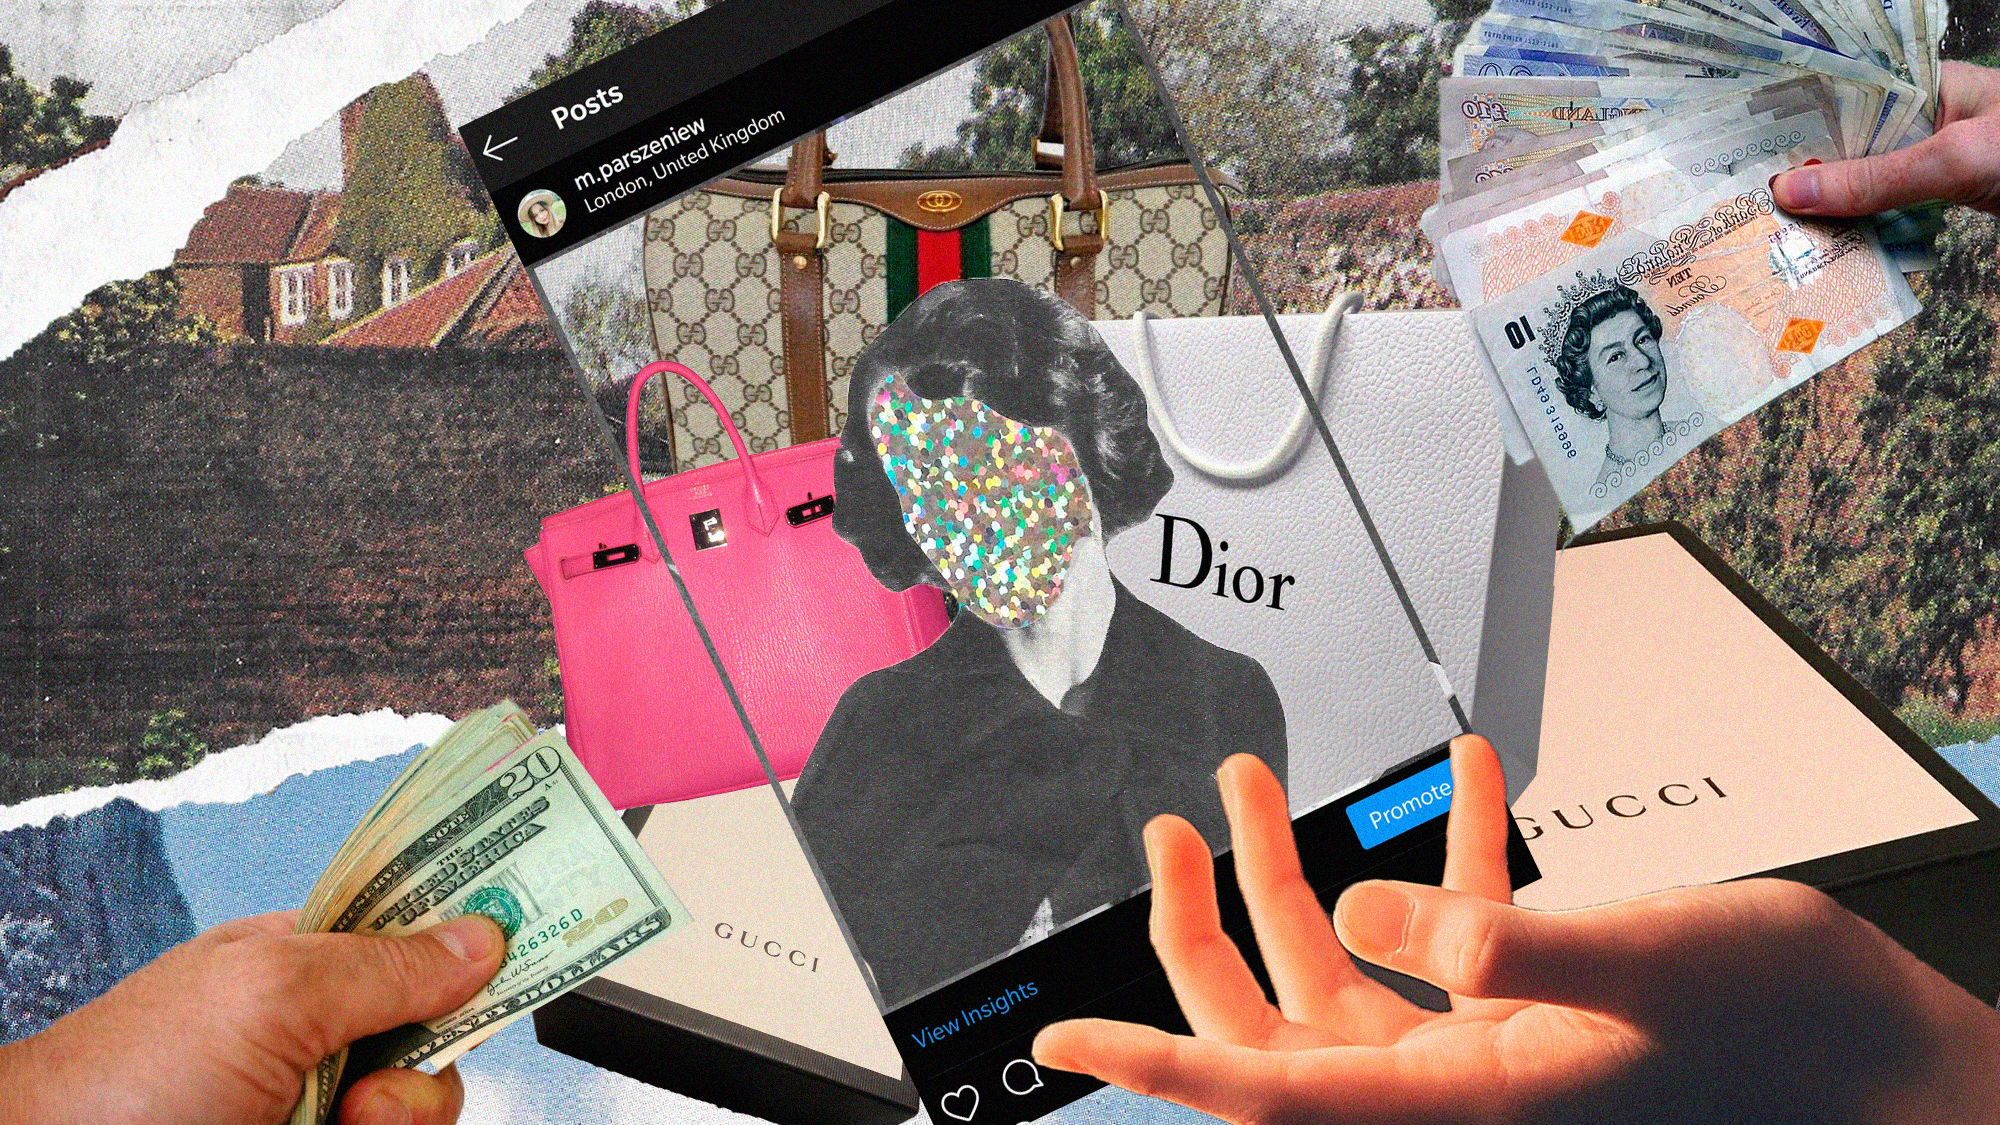 Photoshopped image of money, Gucci and Dior boxes, bags, a lady on Instagram screen